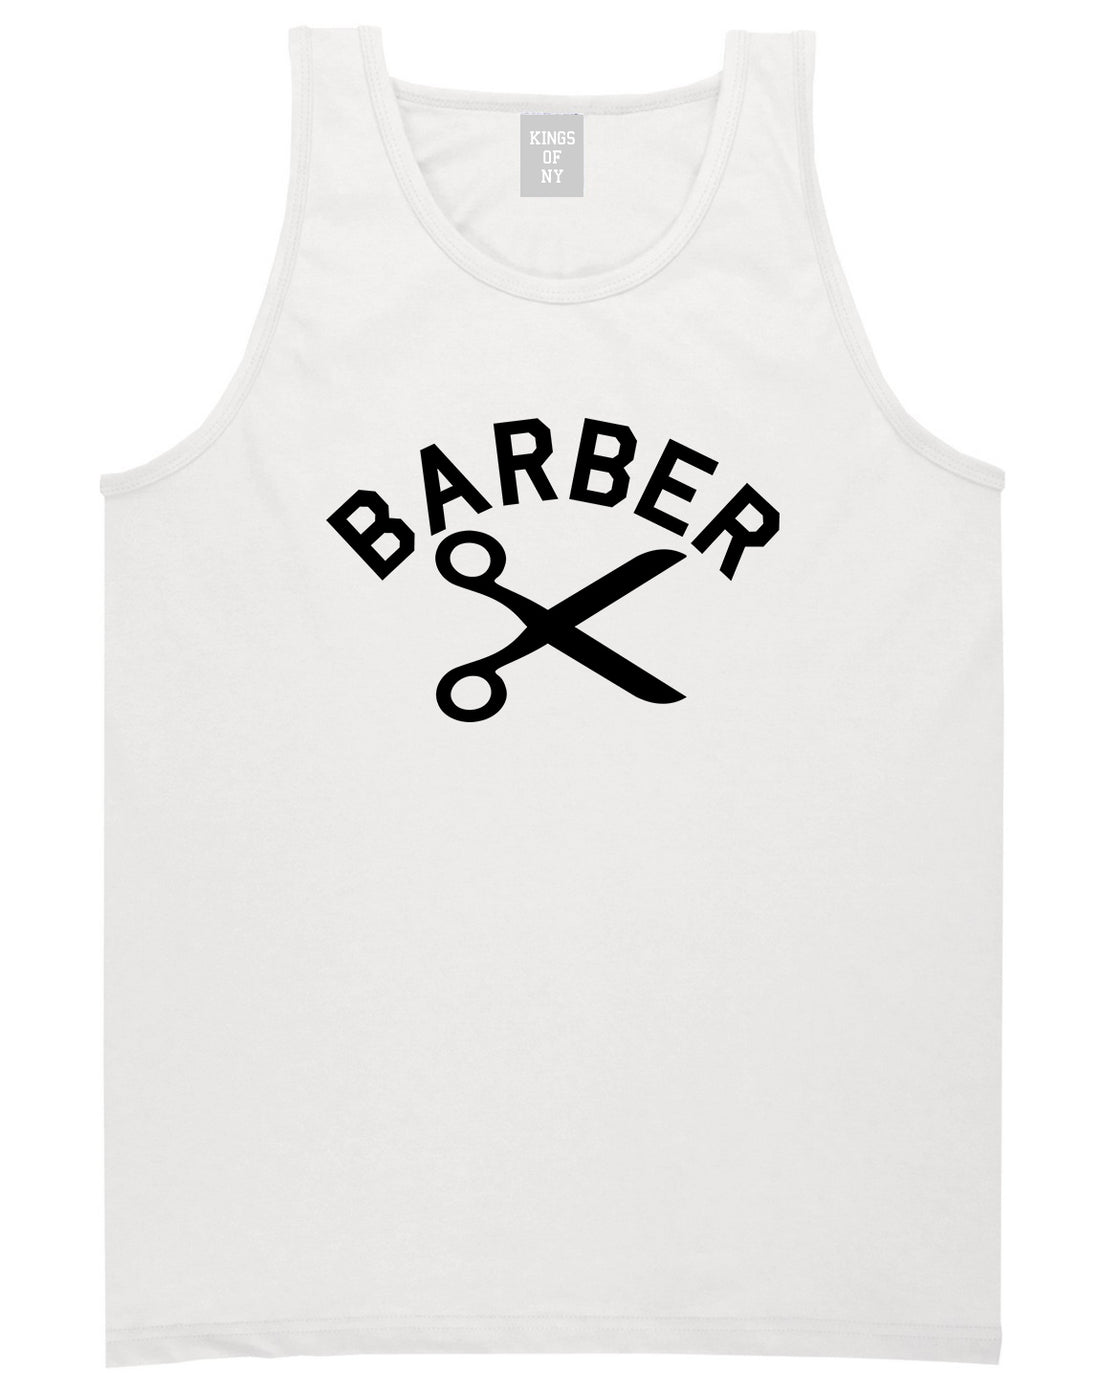 Barber Scissors White Tank Top Shirt by Kings Of NY